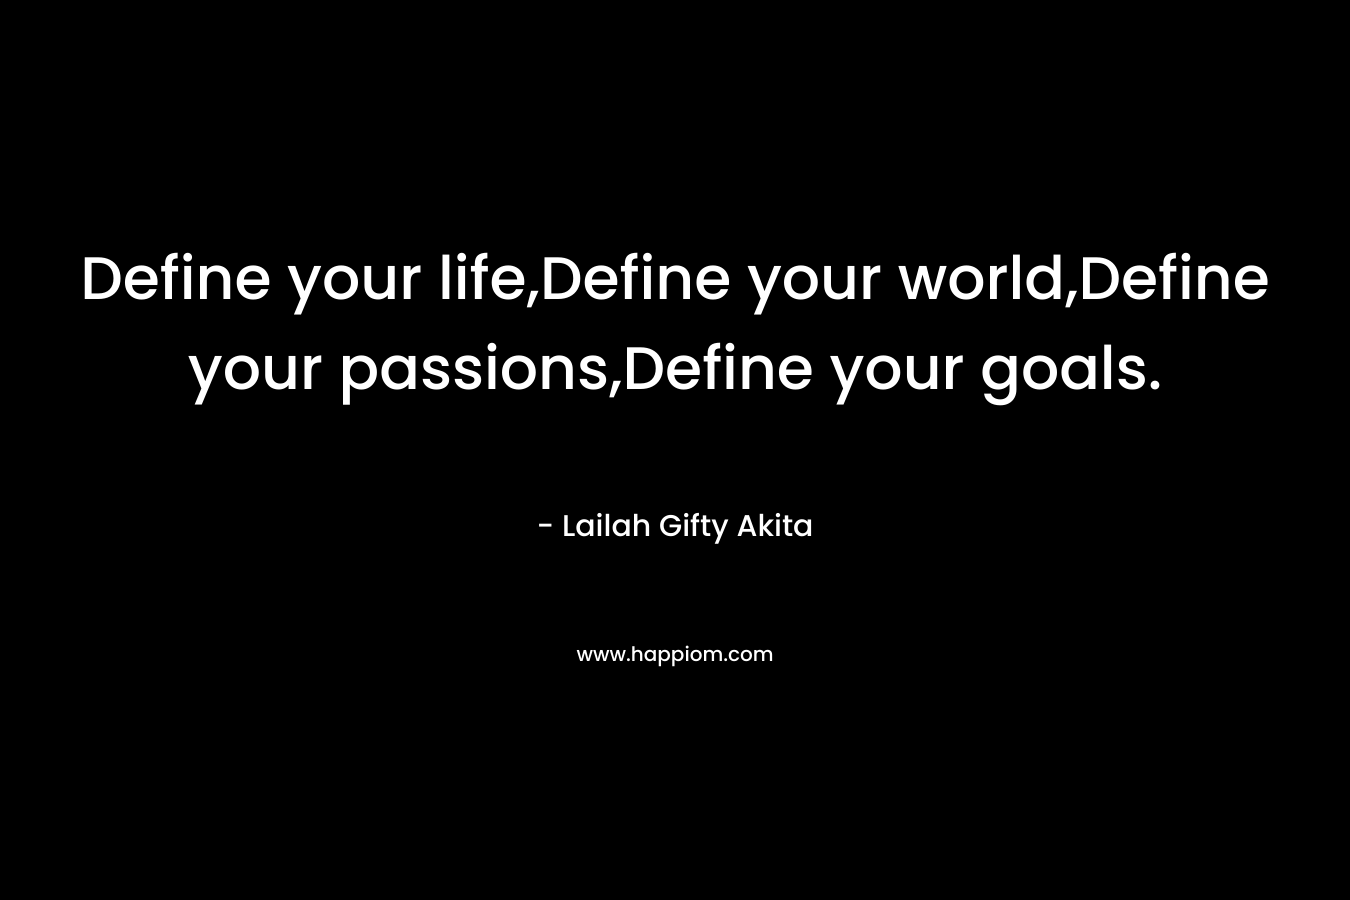 Define your life,Define your world,Define your passions,Define your goals. – Lailah Gifty Akita